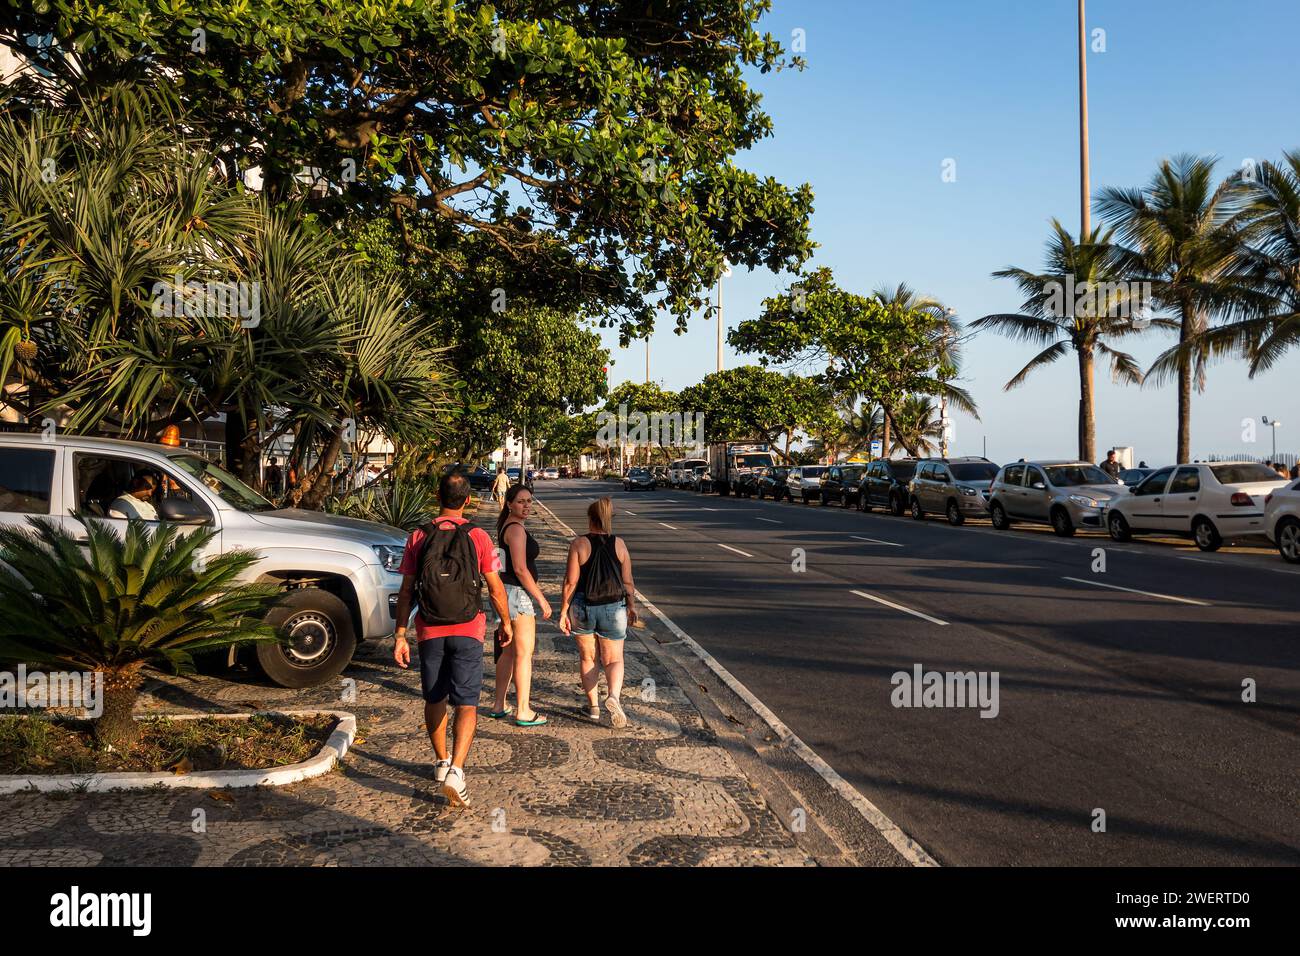 The cobblestone pavement sidewalk of Vieira Souto avenue full of green vegetation nearby the beach at Ipanema district under summer afternoon blue sky. Stock Photo